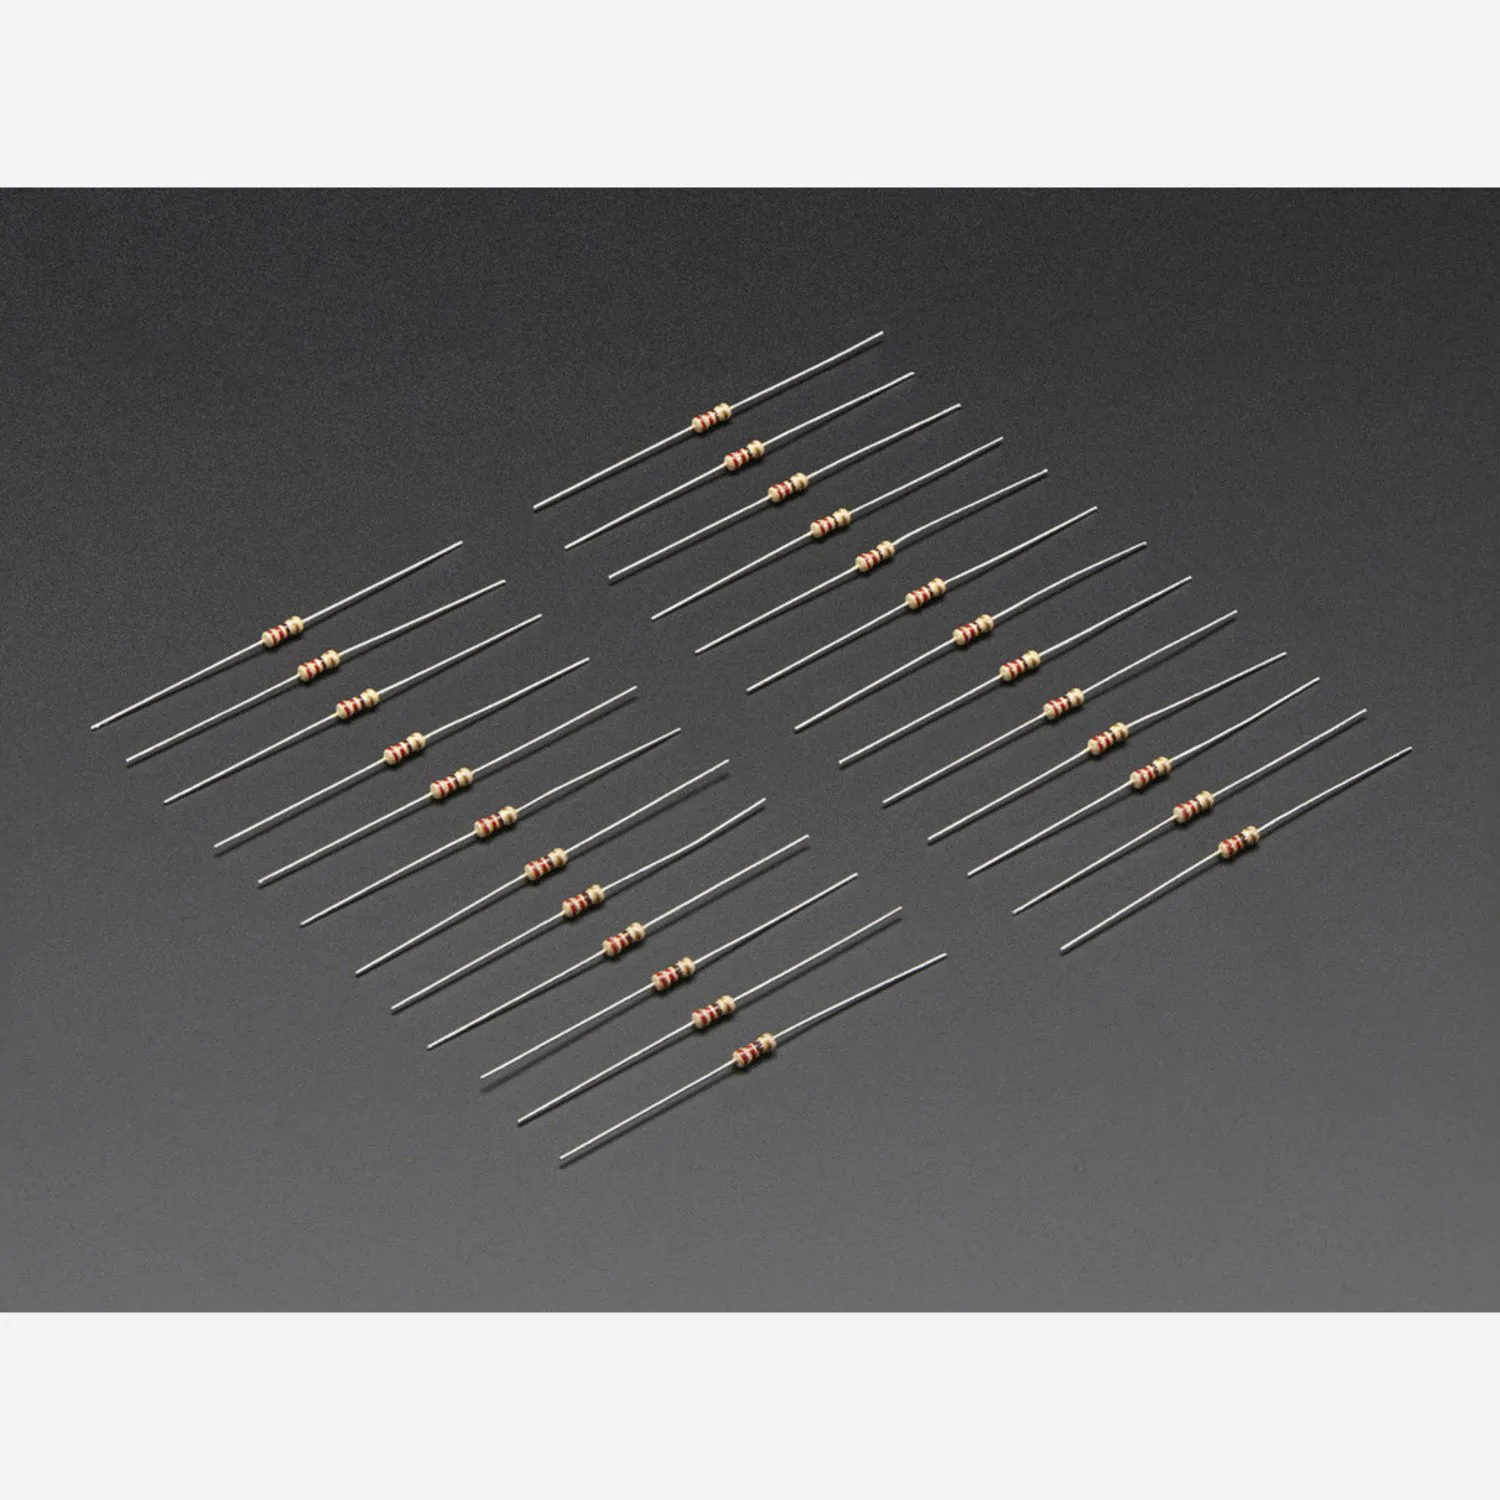 Photo of Through-Hole Resistors - 220 ohm 5% 1/4W - Pack of 25